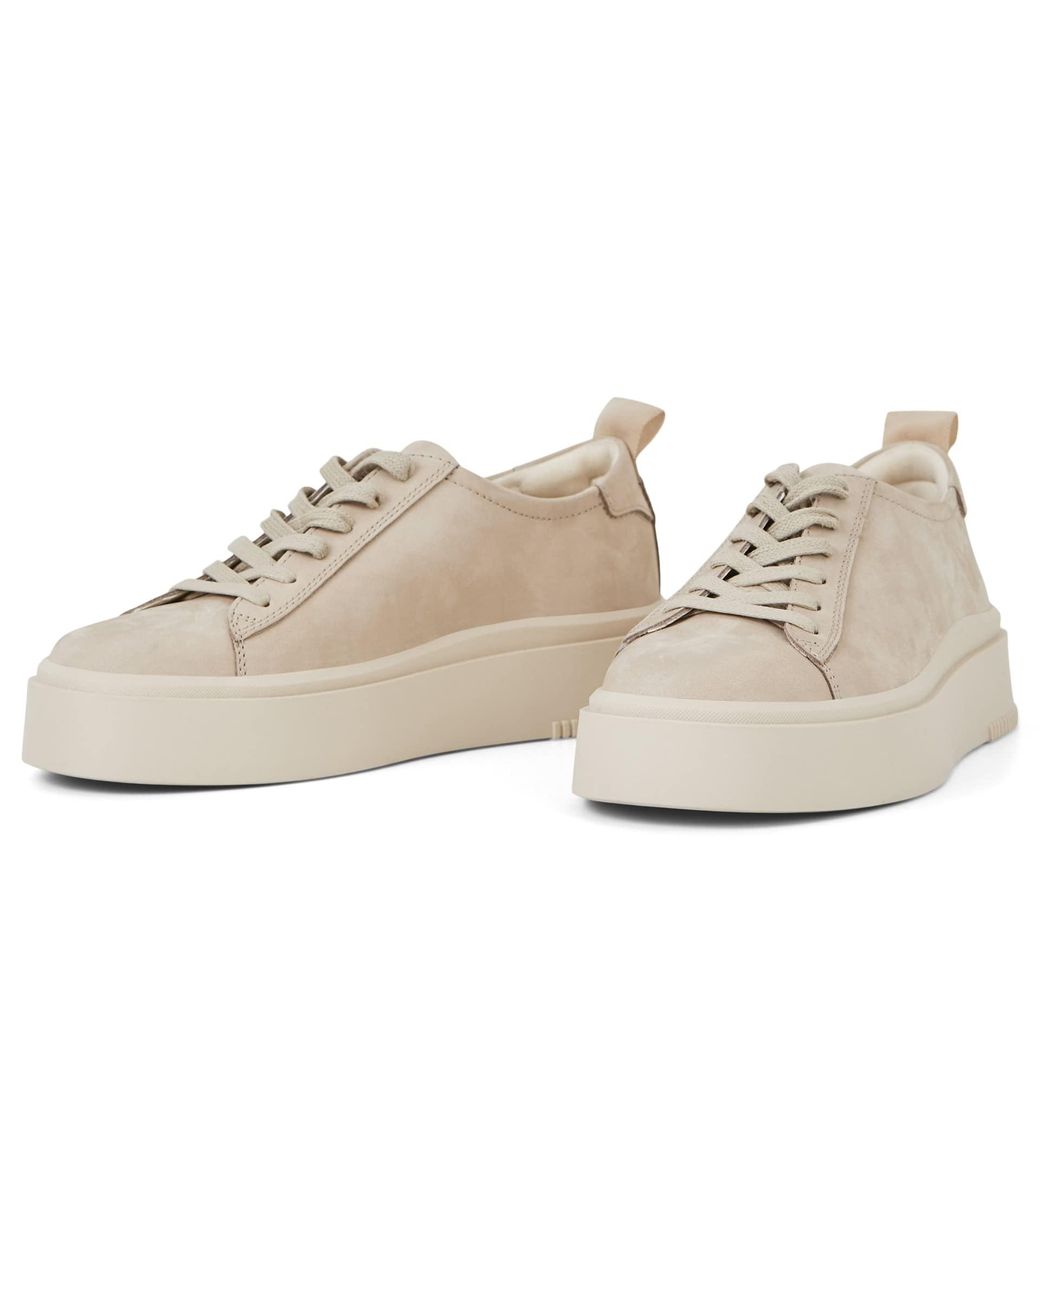 Vagabond Shoemakers Stacy Nubuck Sneaker in Natural | Lyst